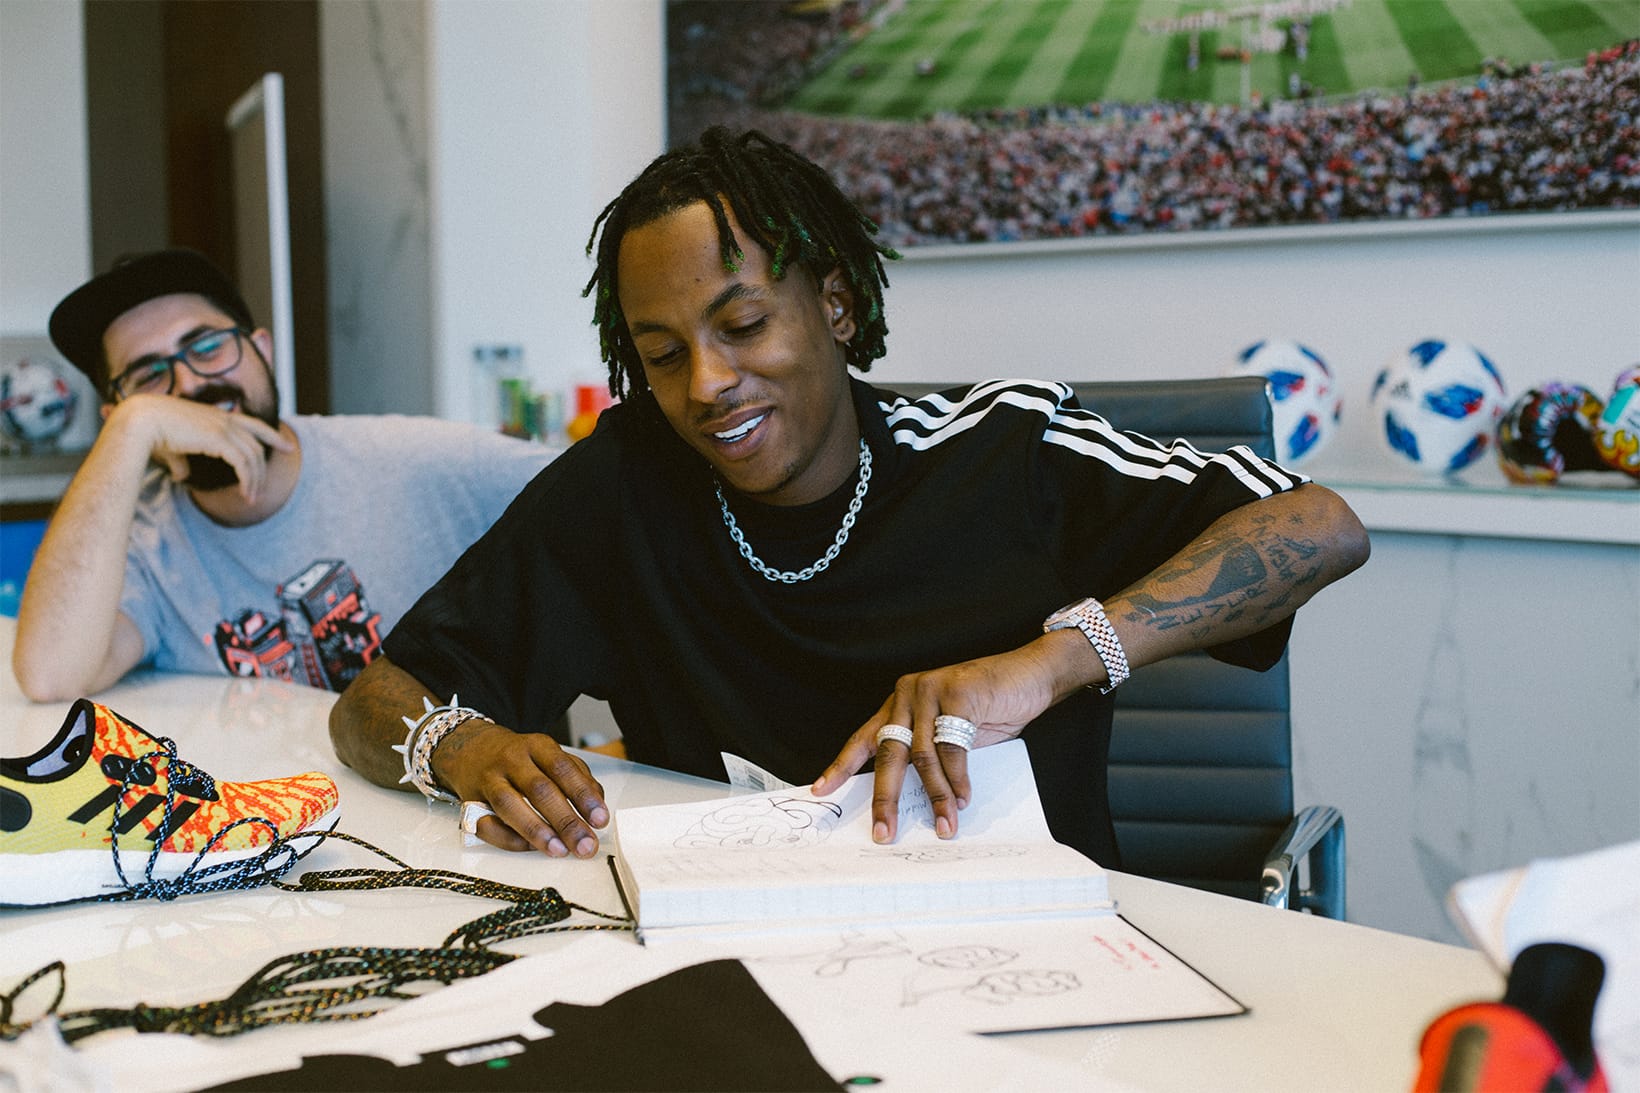 Travis Love and Rich the Kid AM4MLS 